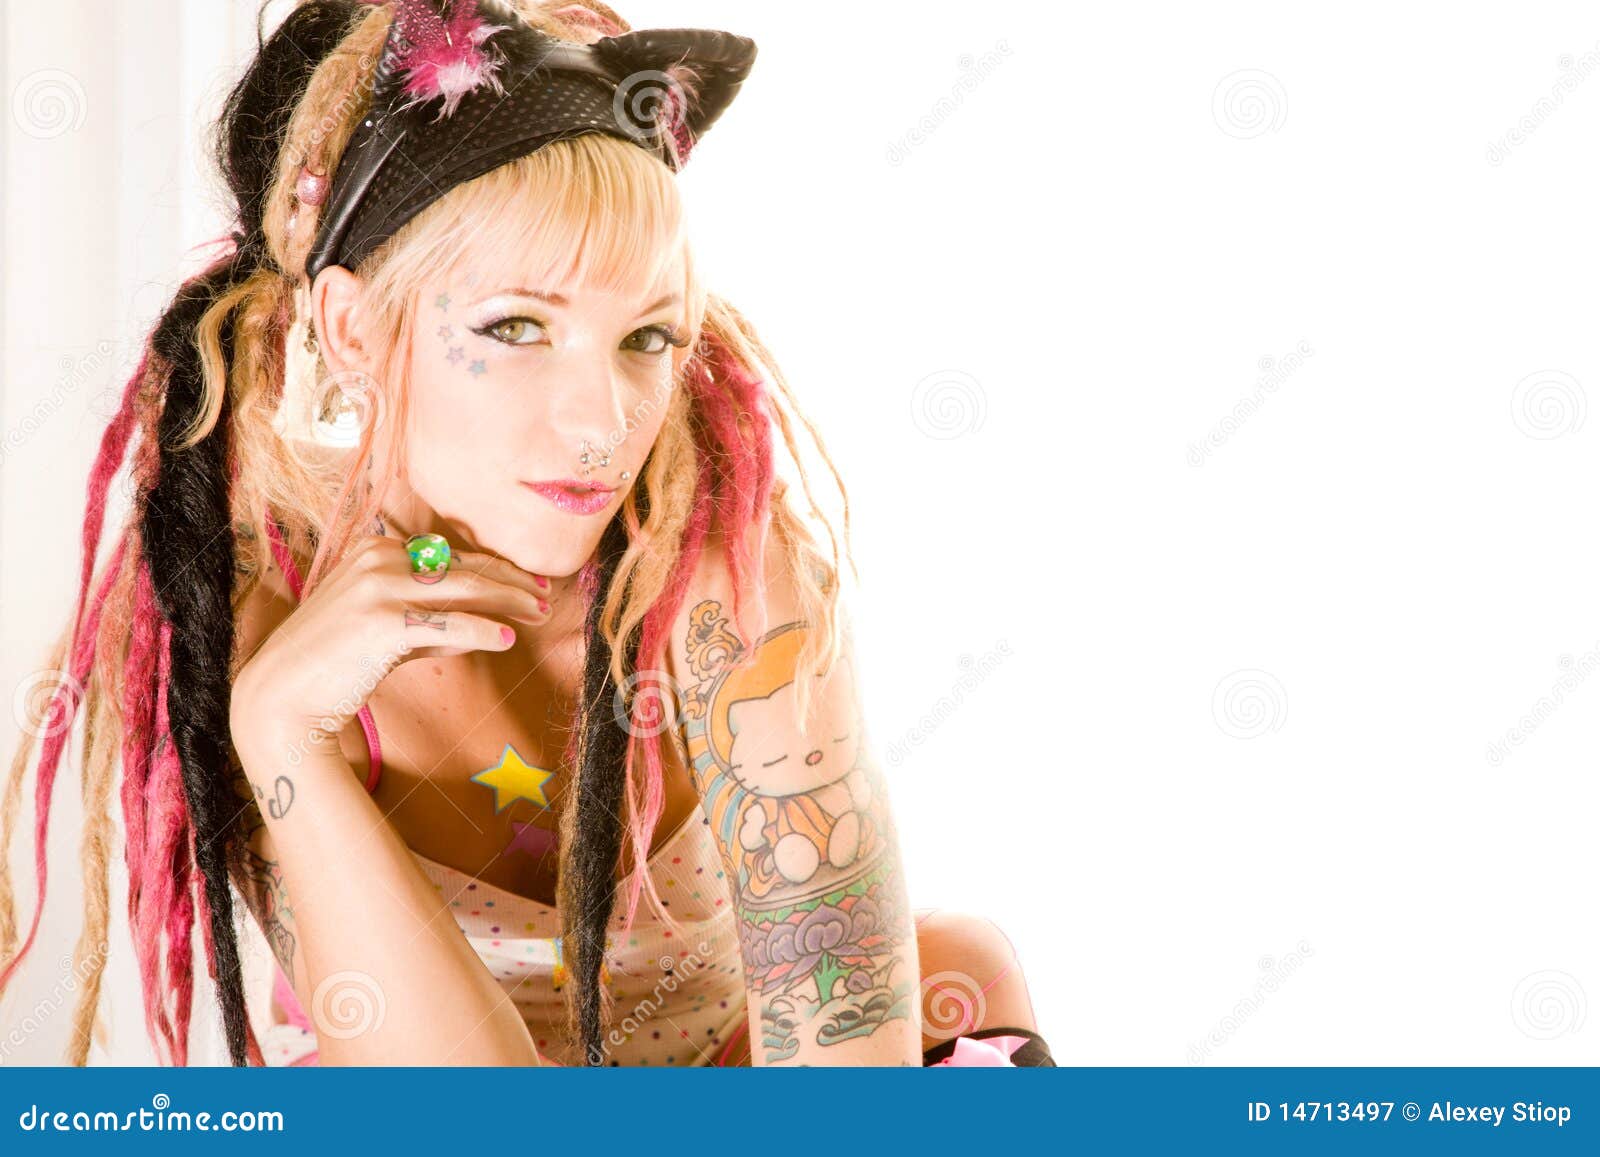 Girl with tattoos stock image. Image of adult, contemporary - 10784515